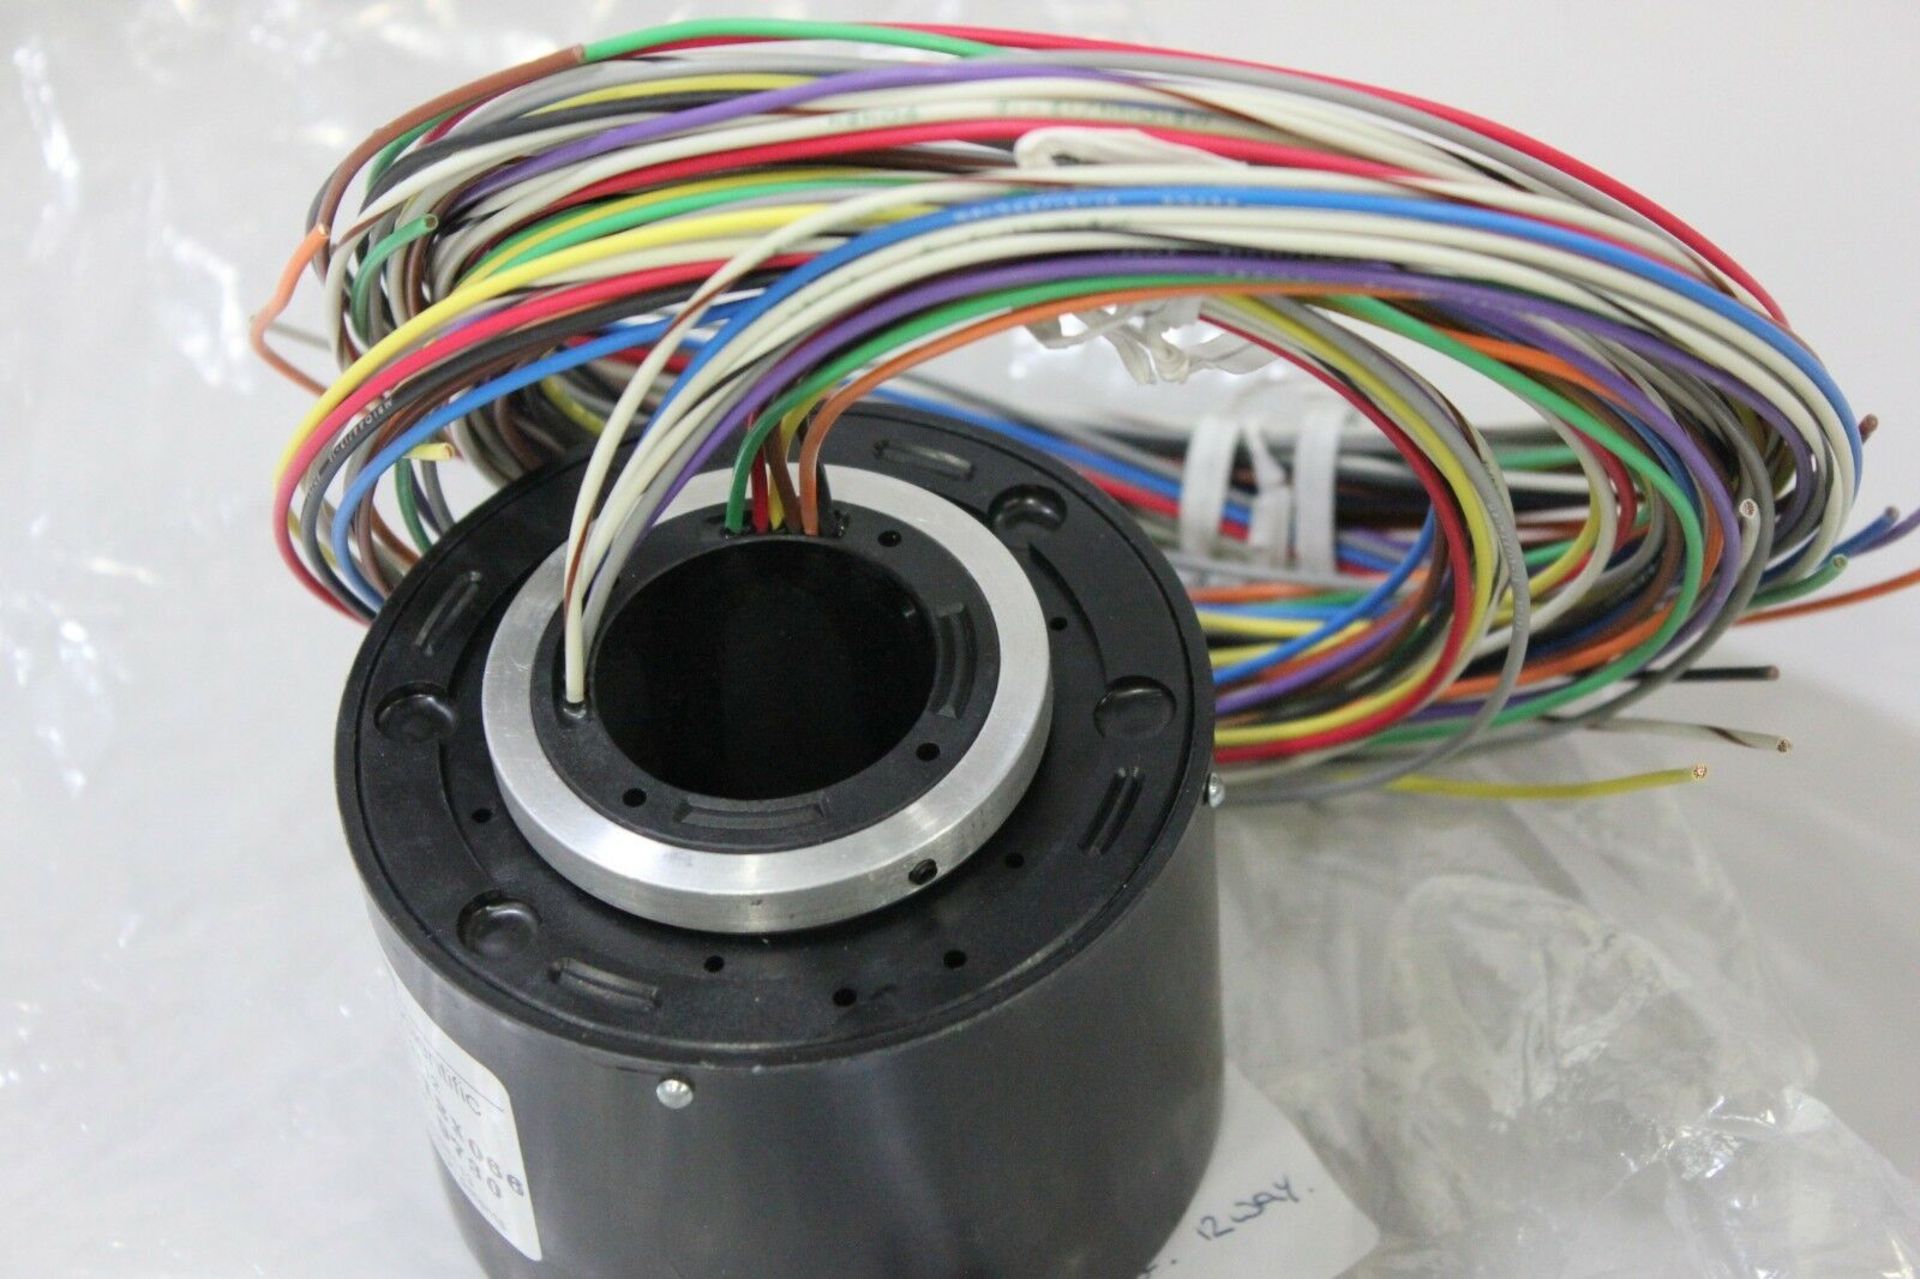 New Litton Poly Scientific 12 Way Slip Ring Slipring Assembly - Image 5 of 5